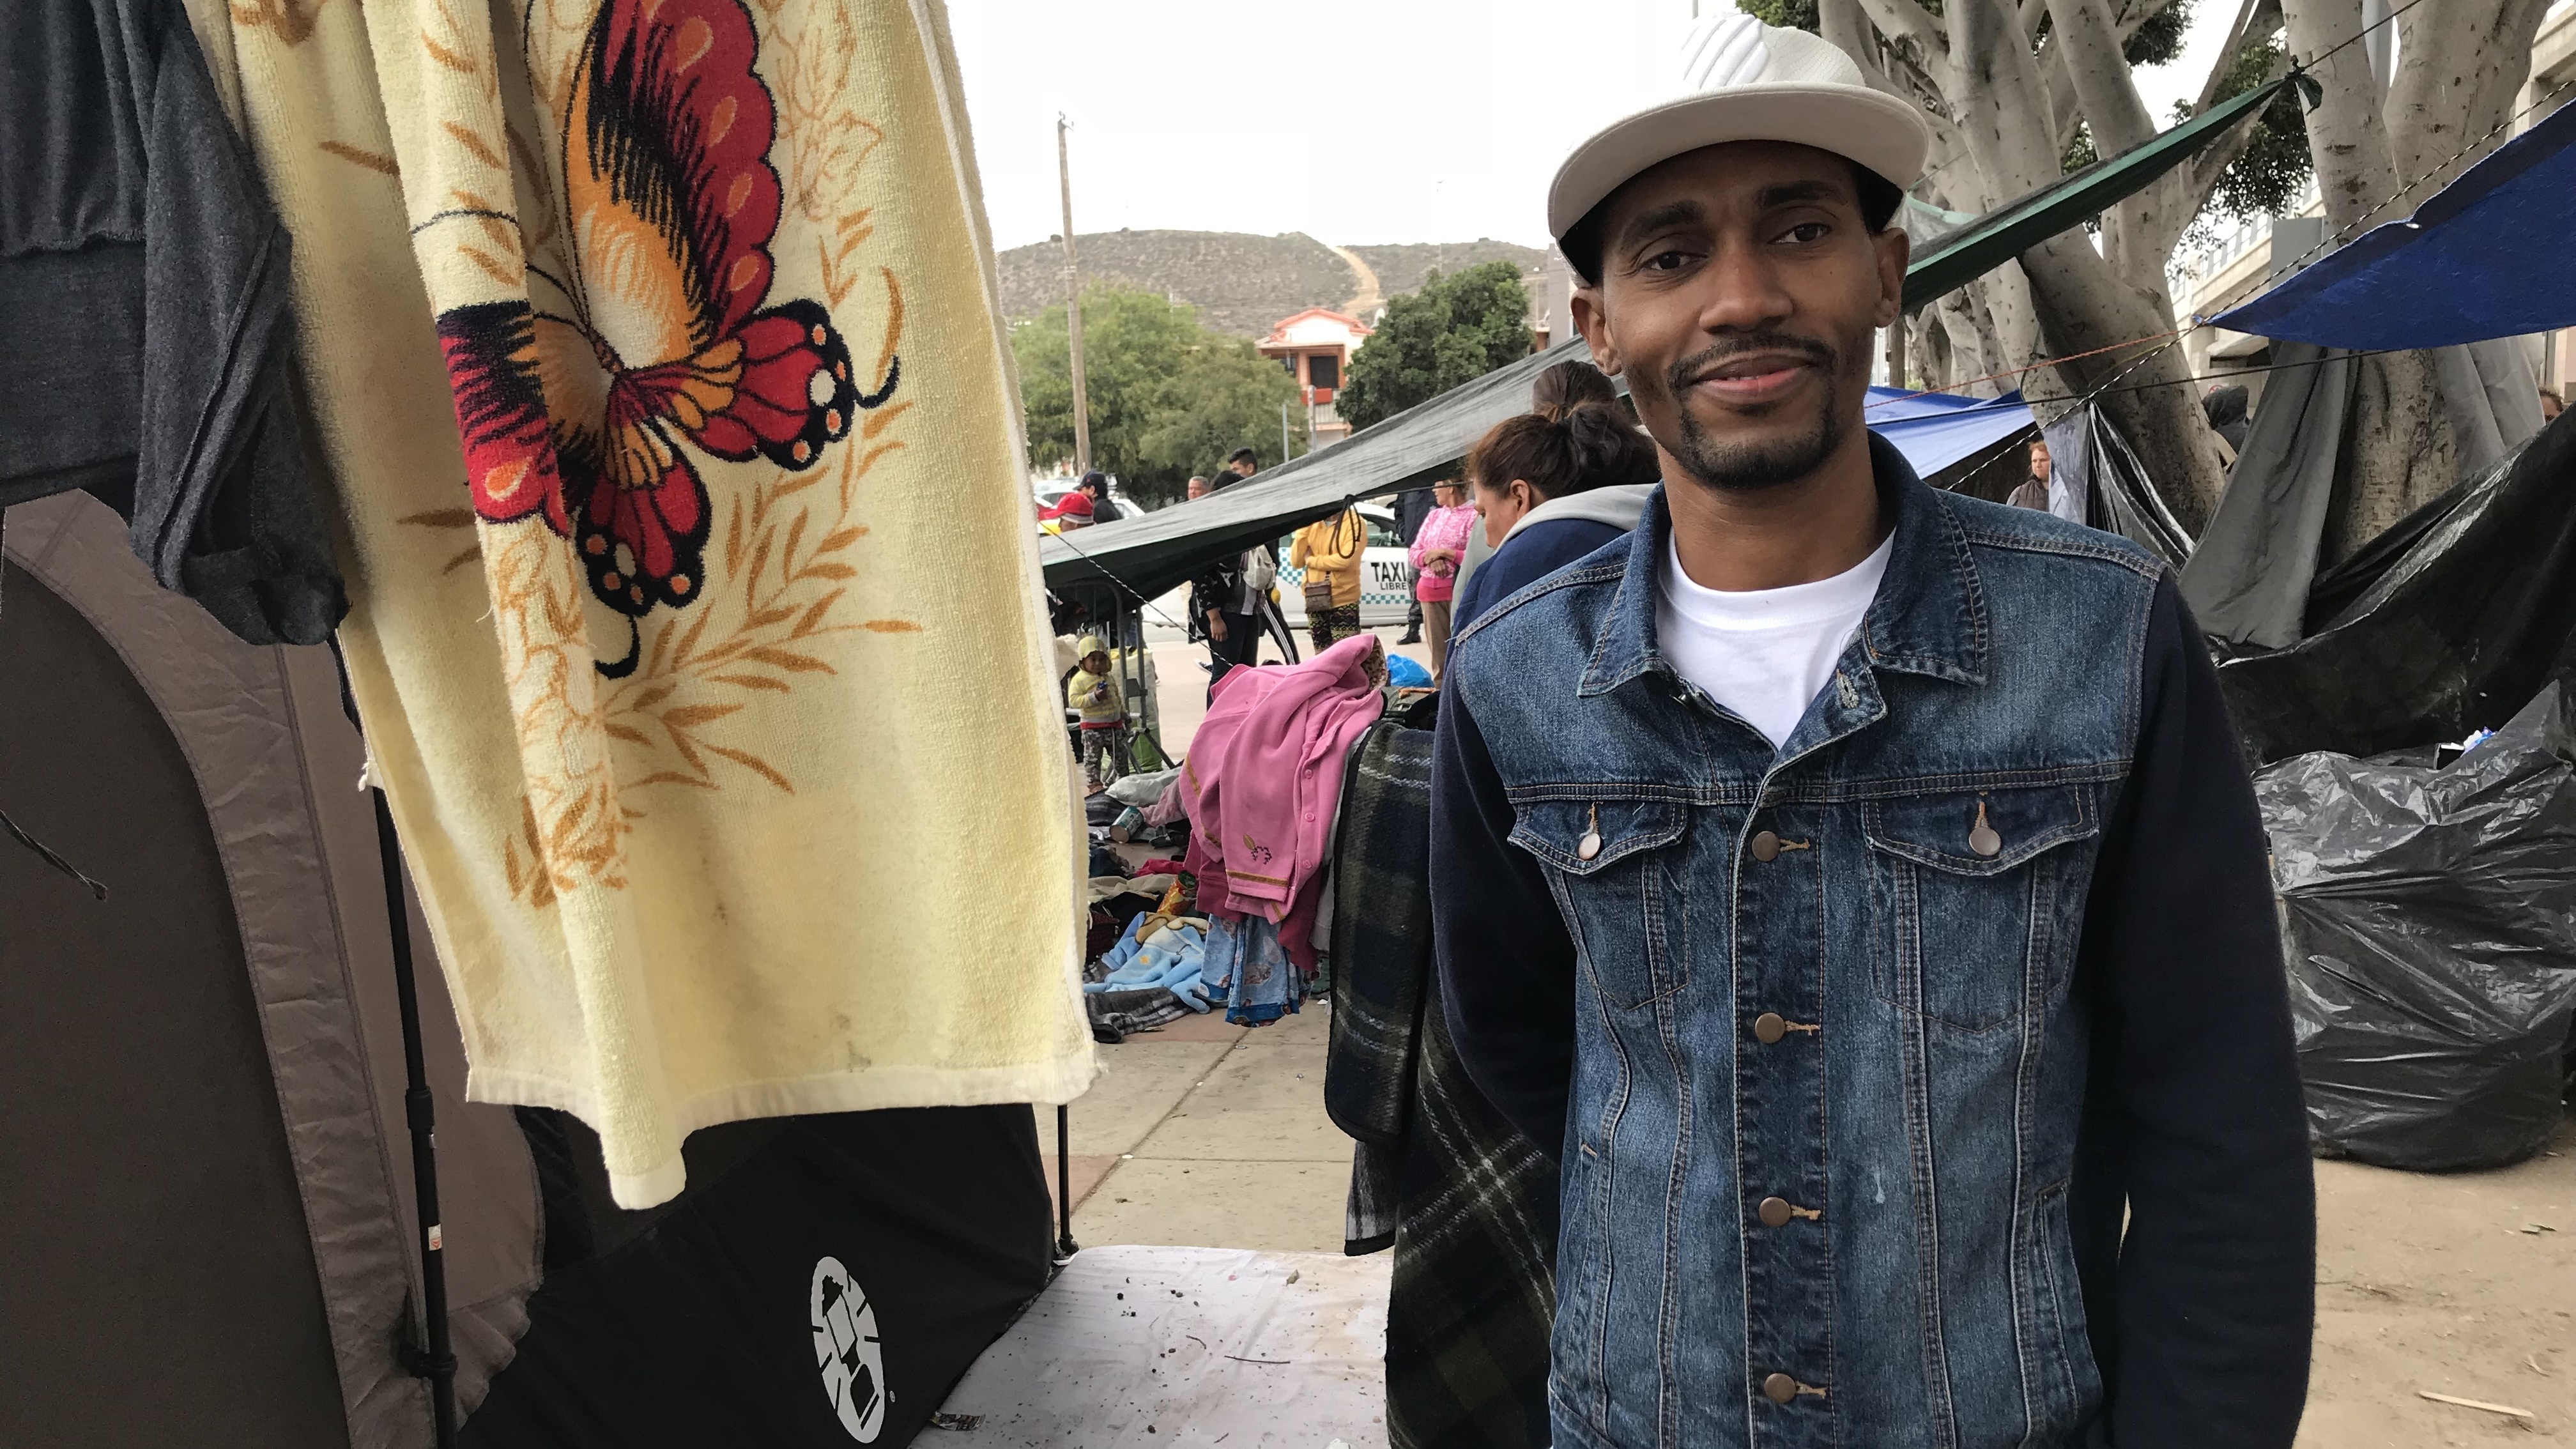 Jean Stevenson Dorvil, originally from Haiti, spent six months trying to reach Tijuana from Venezuela where he had been living. He hopes to be granted political asylum by the United States, but he's been waiting on the Mexican side for the past six months with no word from authorities of his fate.
